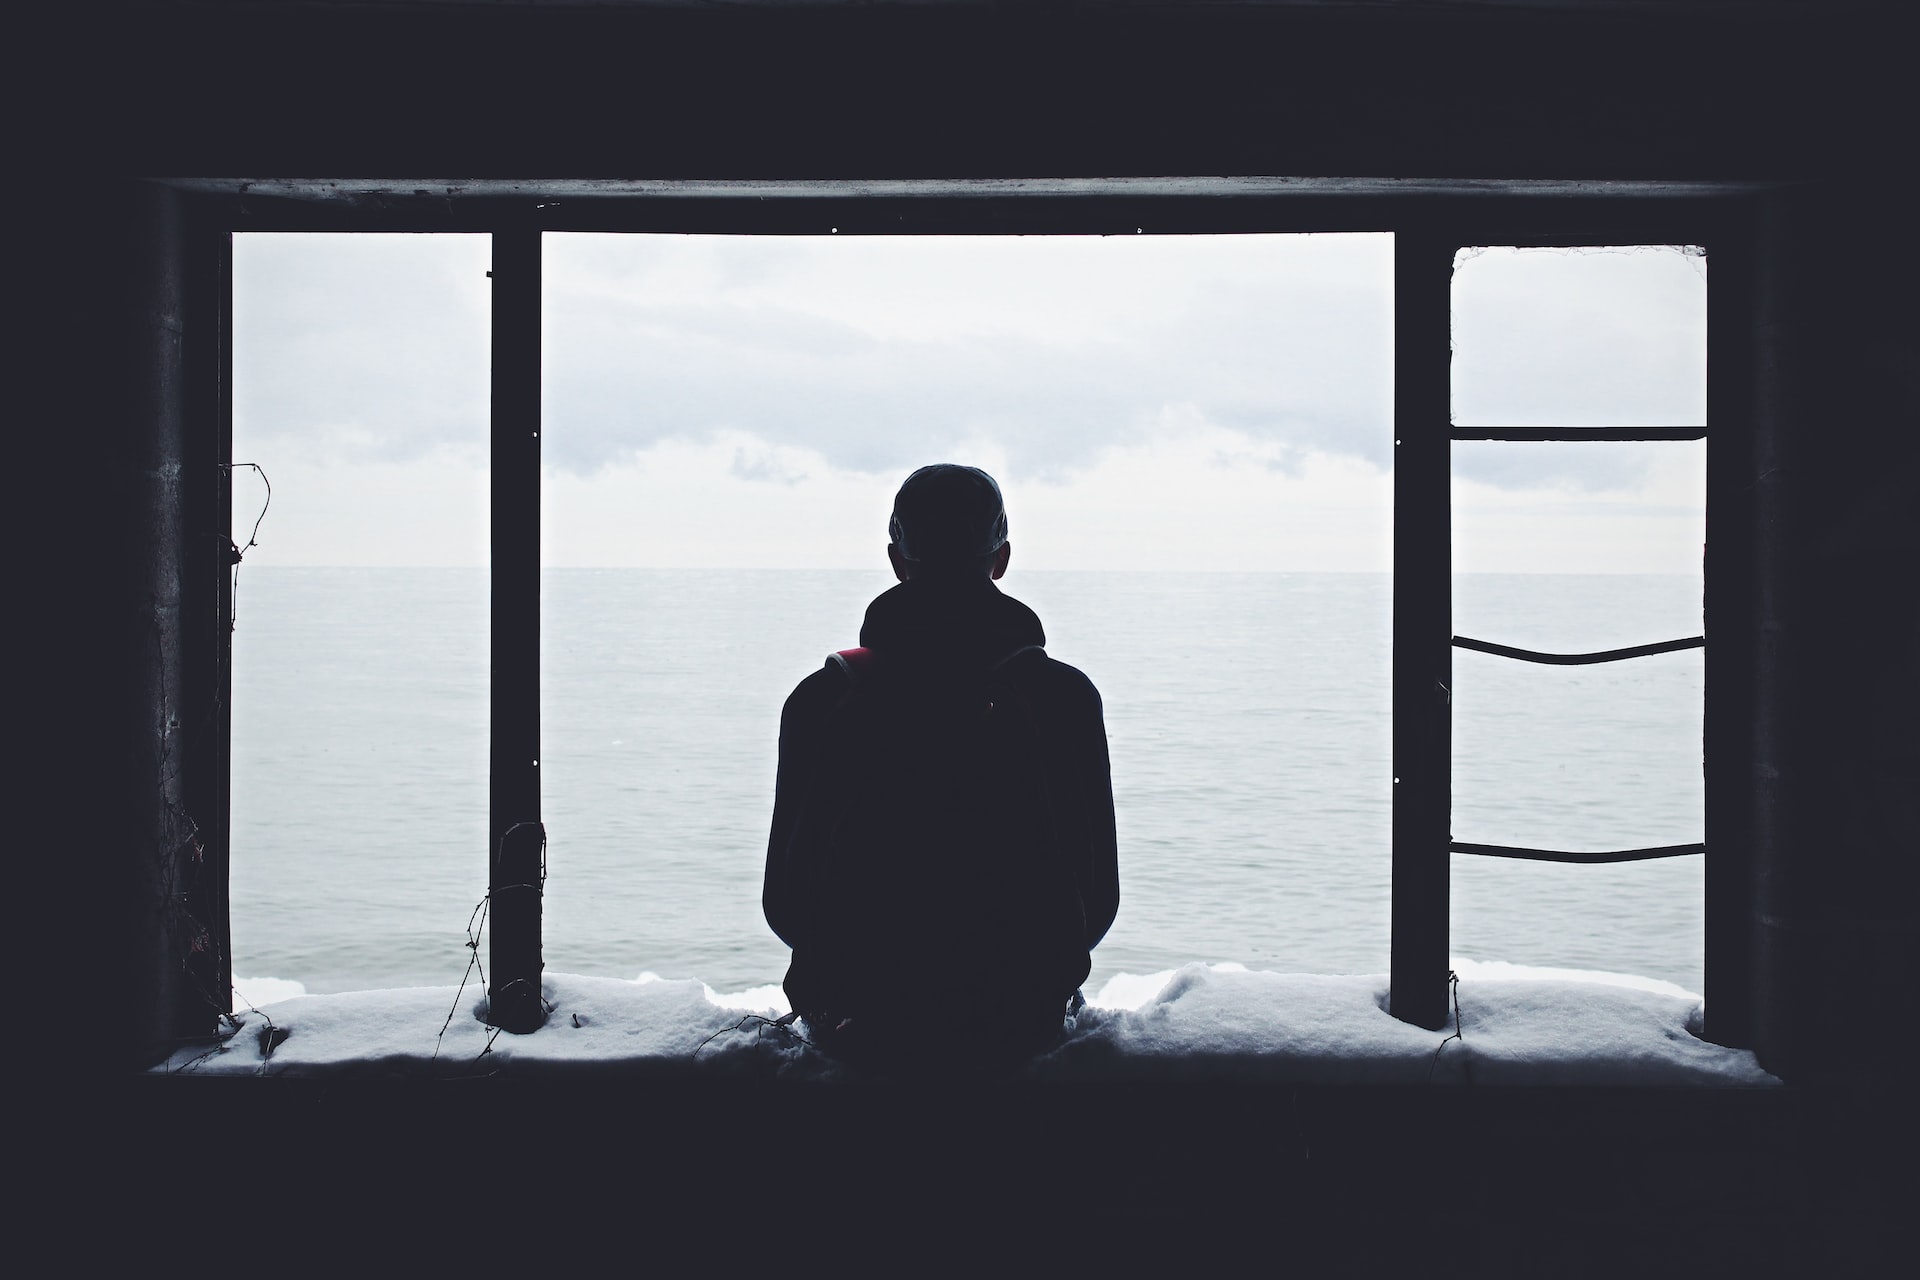 Silhouette of a person sitting at a window and looking out